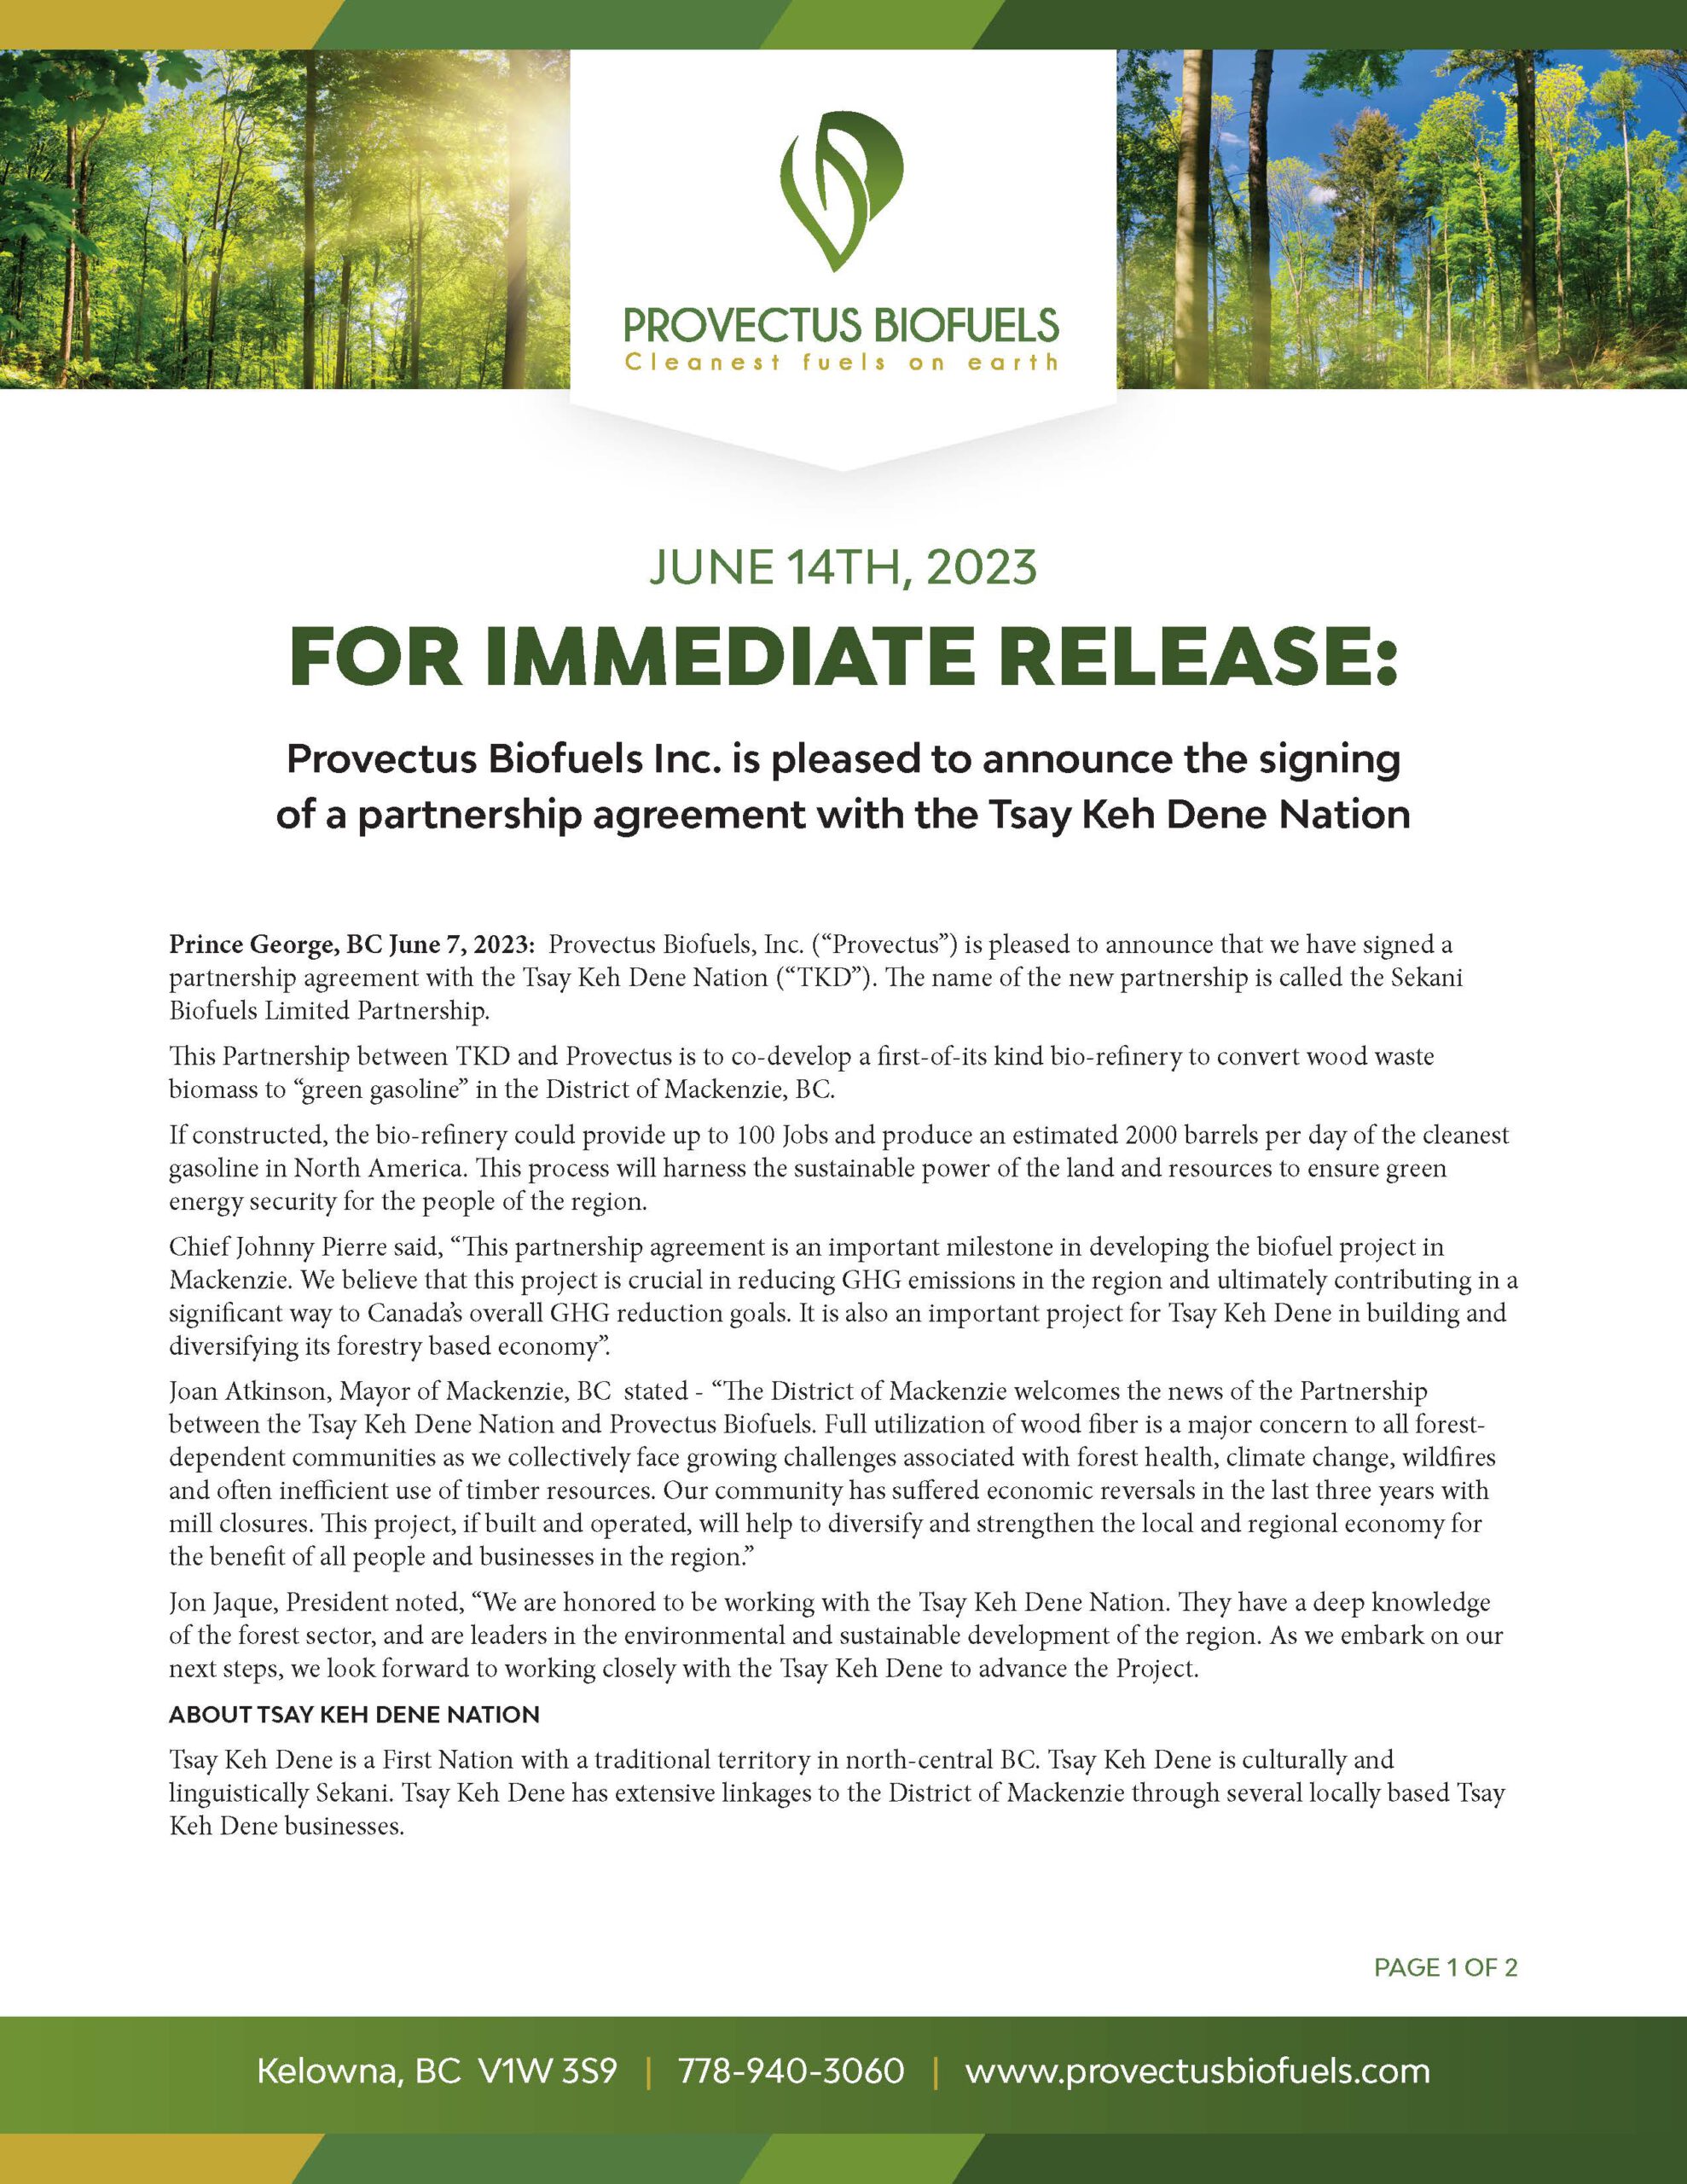 Provectus Biofuels News Release June 14, 2023 Page 1